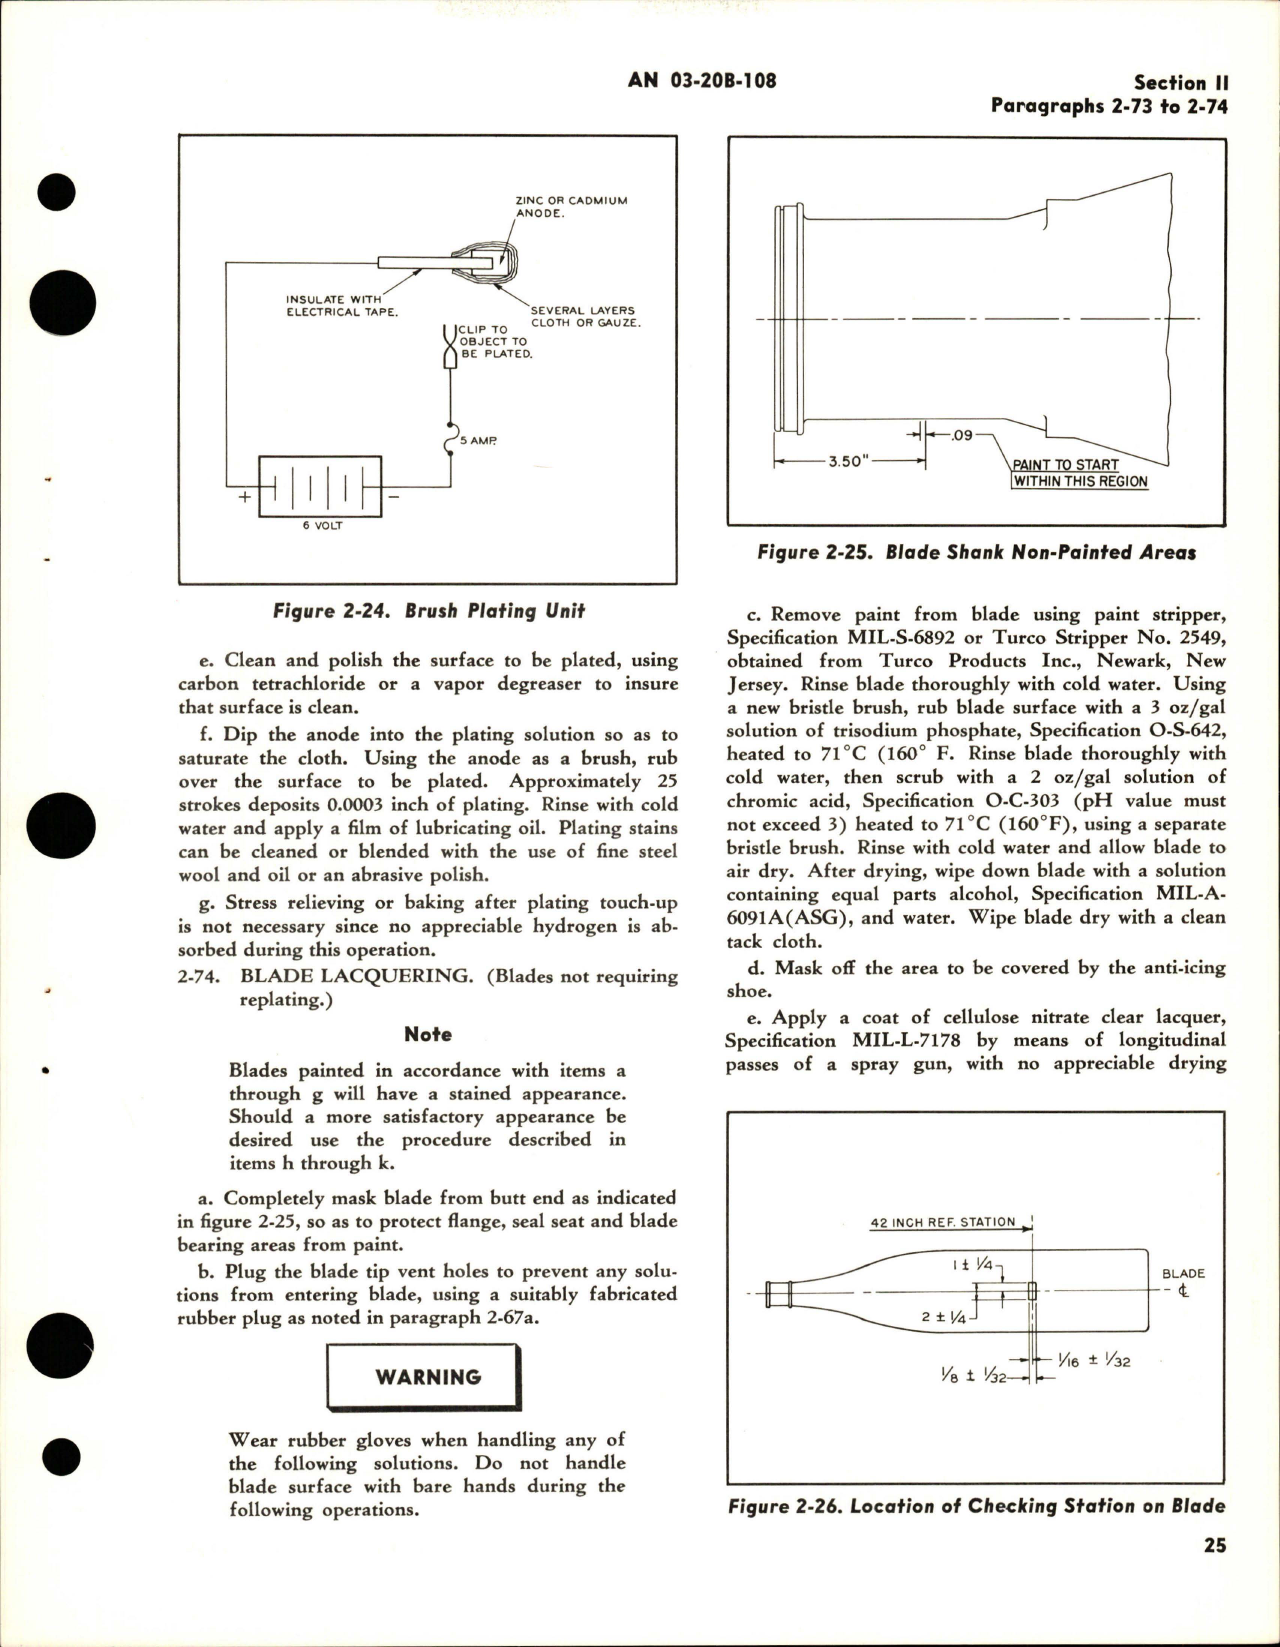 Sample page 9 from AirCorps Library document: Overhaul Instructions for Pitch Lever Type Electric Propeller - Models C432S-C22, C432S-C24, and C432S-C26